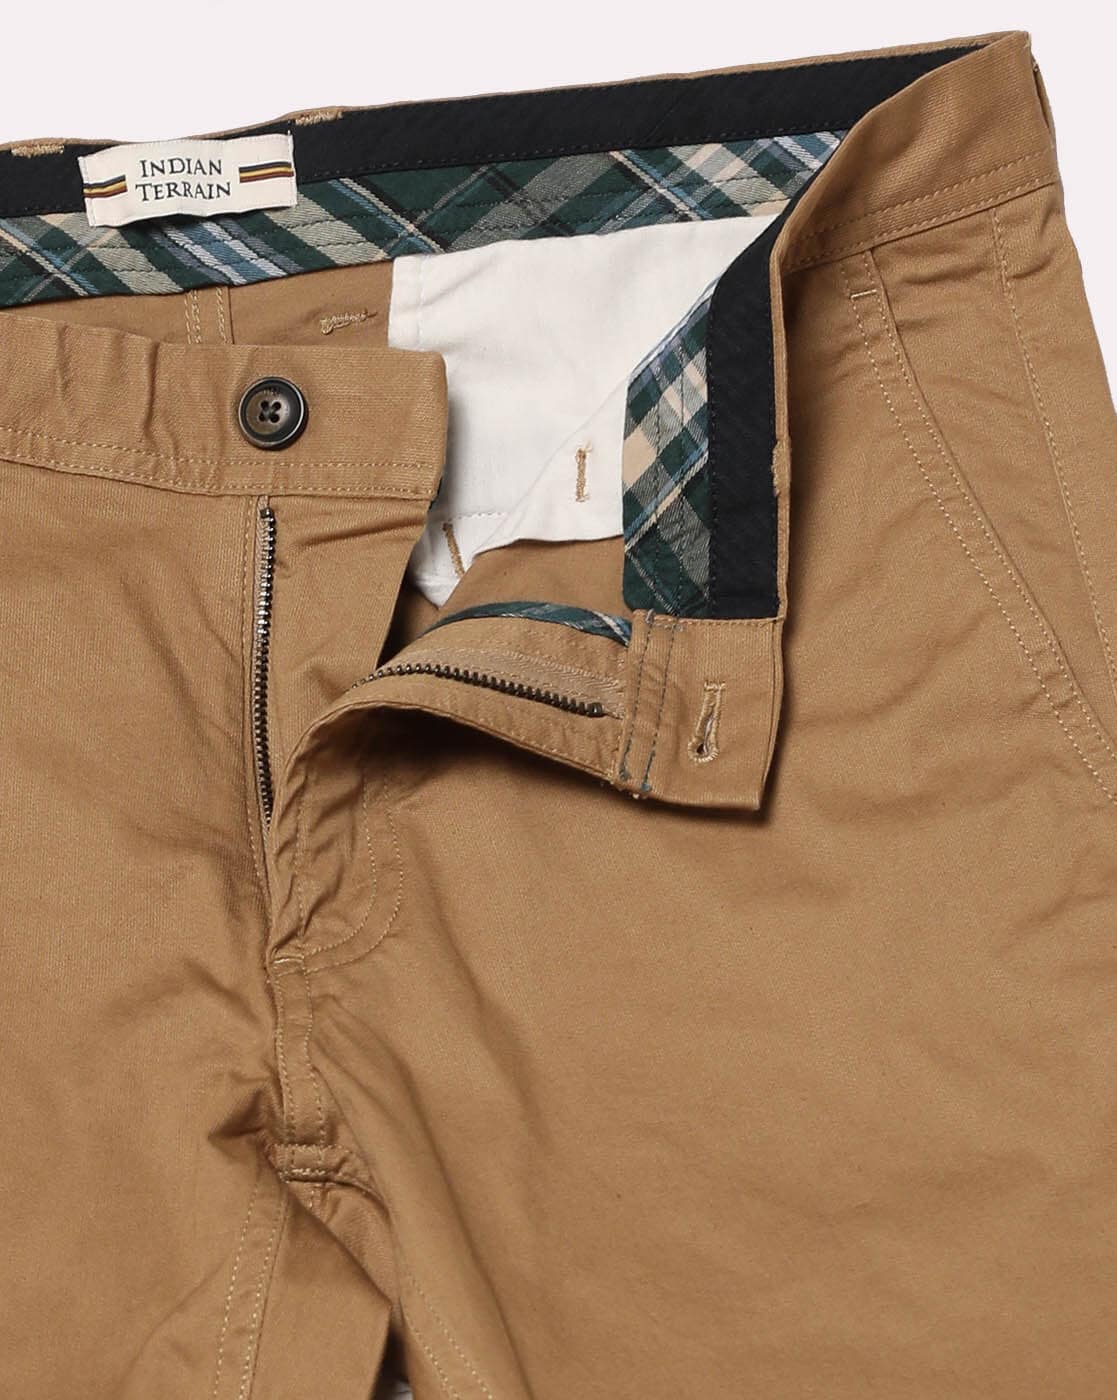 Indian Terrain beige premium chinos (size 32 - straight fit) @ ₹600 +  shipping : r/IndiaThriftStore